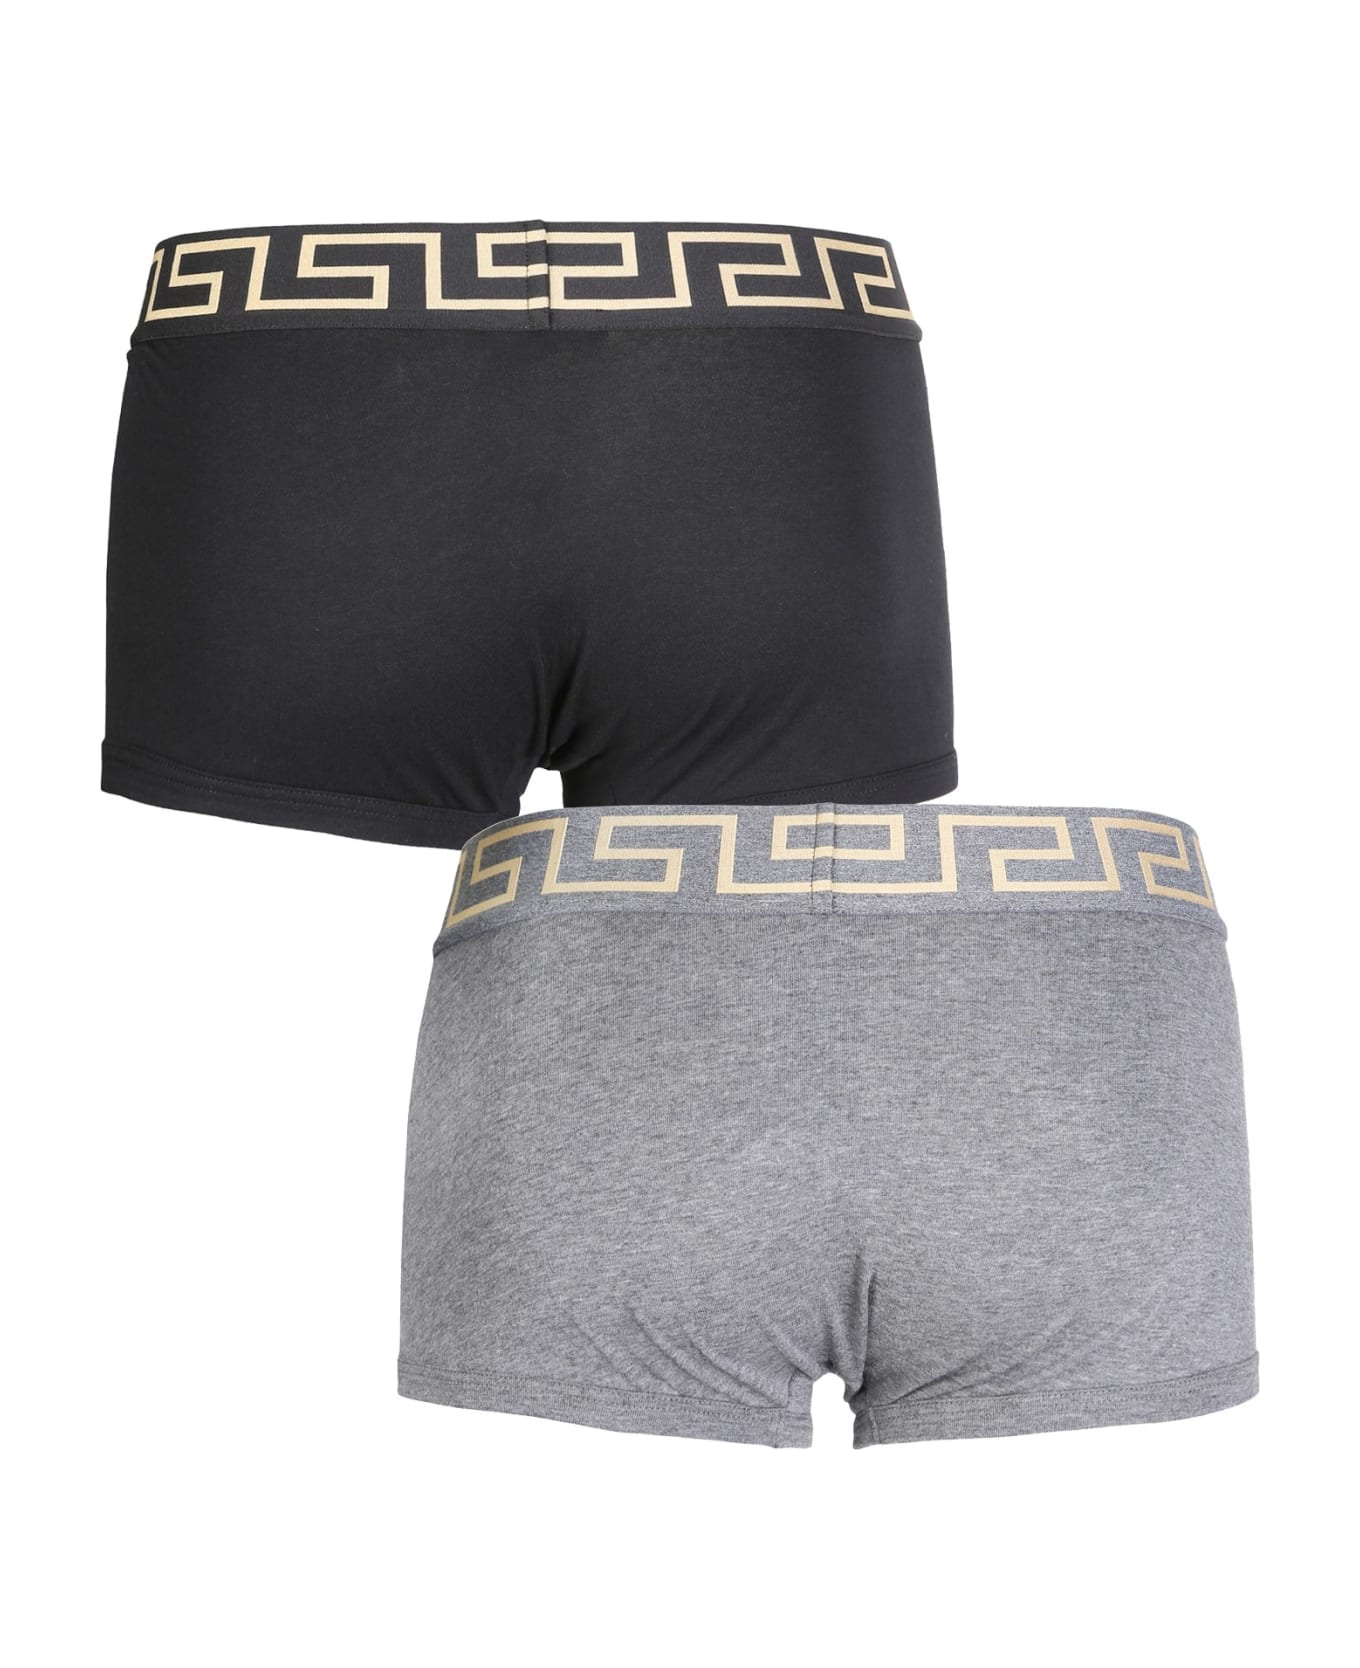 Versace Pack Of Two Boxer Shorts With Greek - NERO GRIGIO